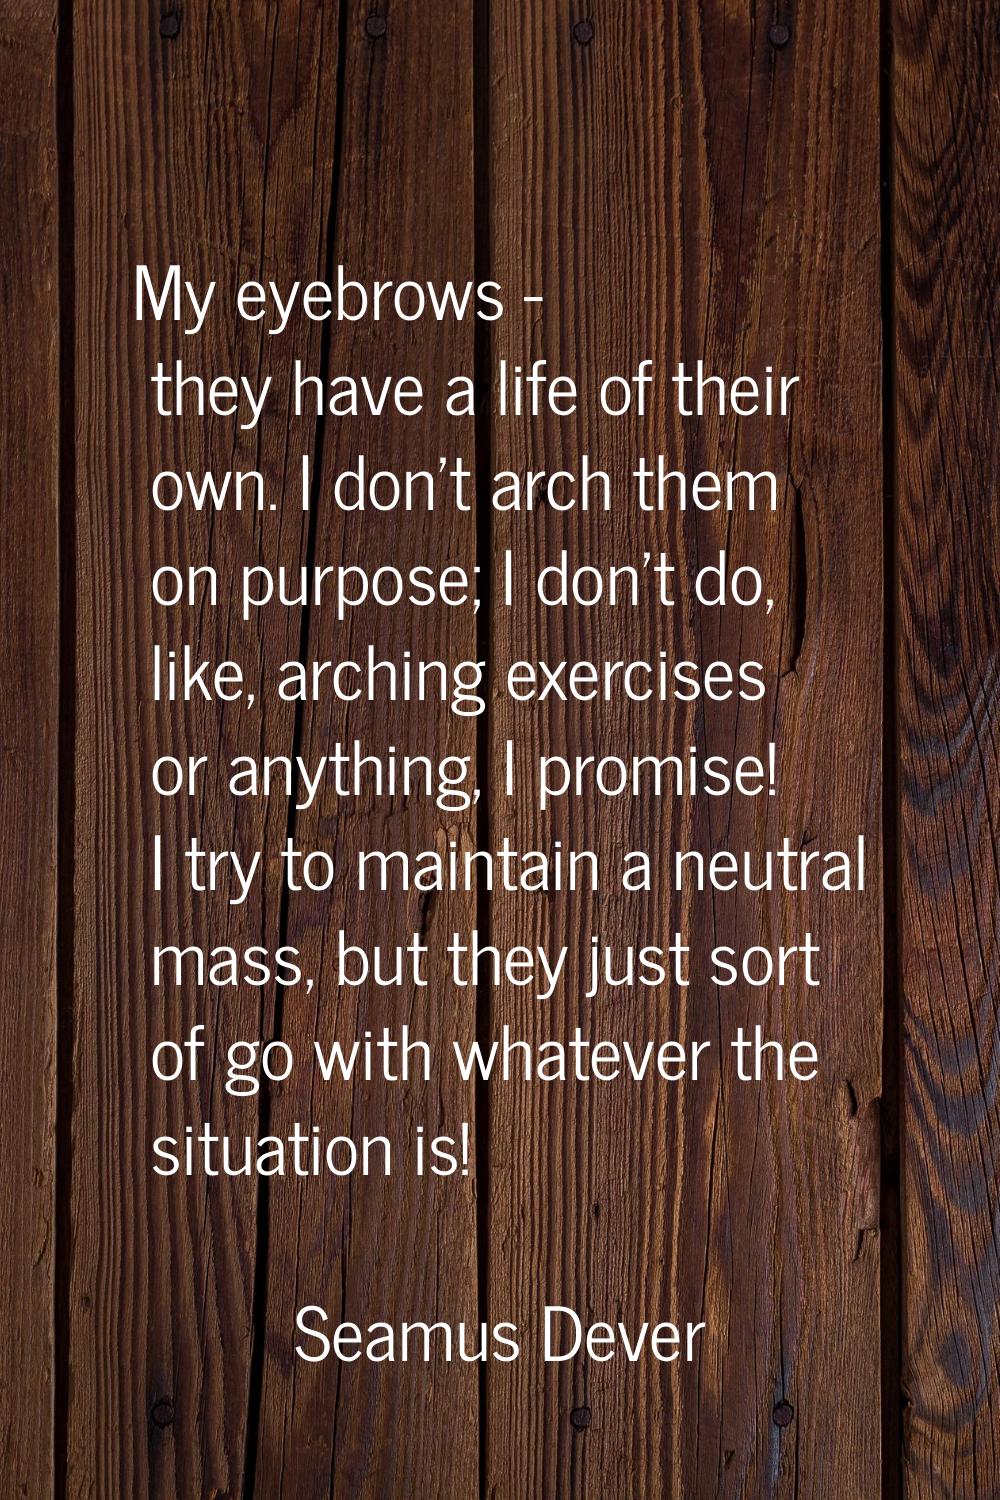 My eyebrows - they have a life of their own. I don't arch them on purpose; I don't do, like, archin